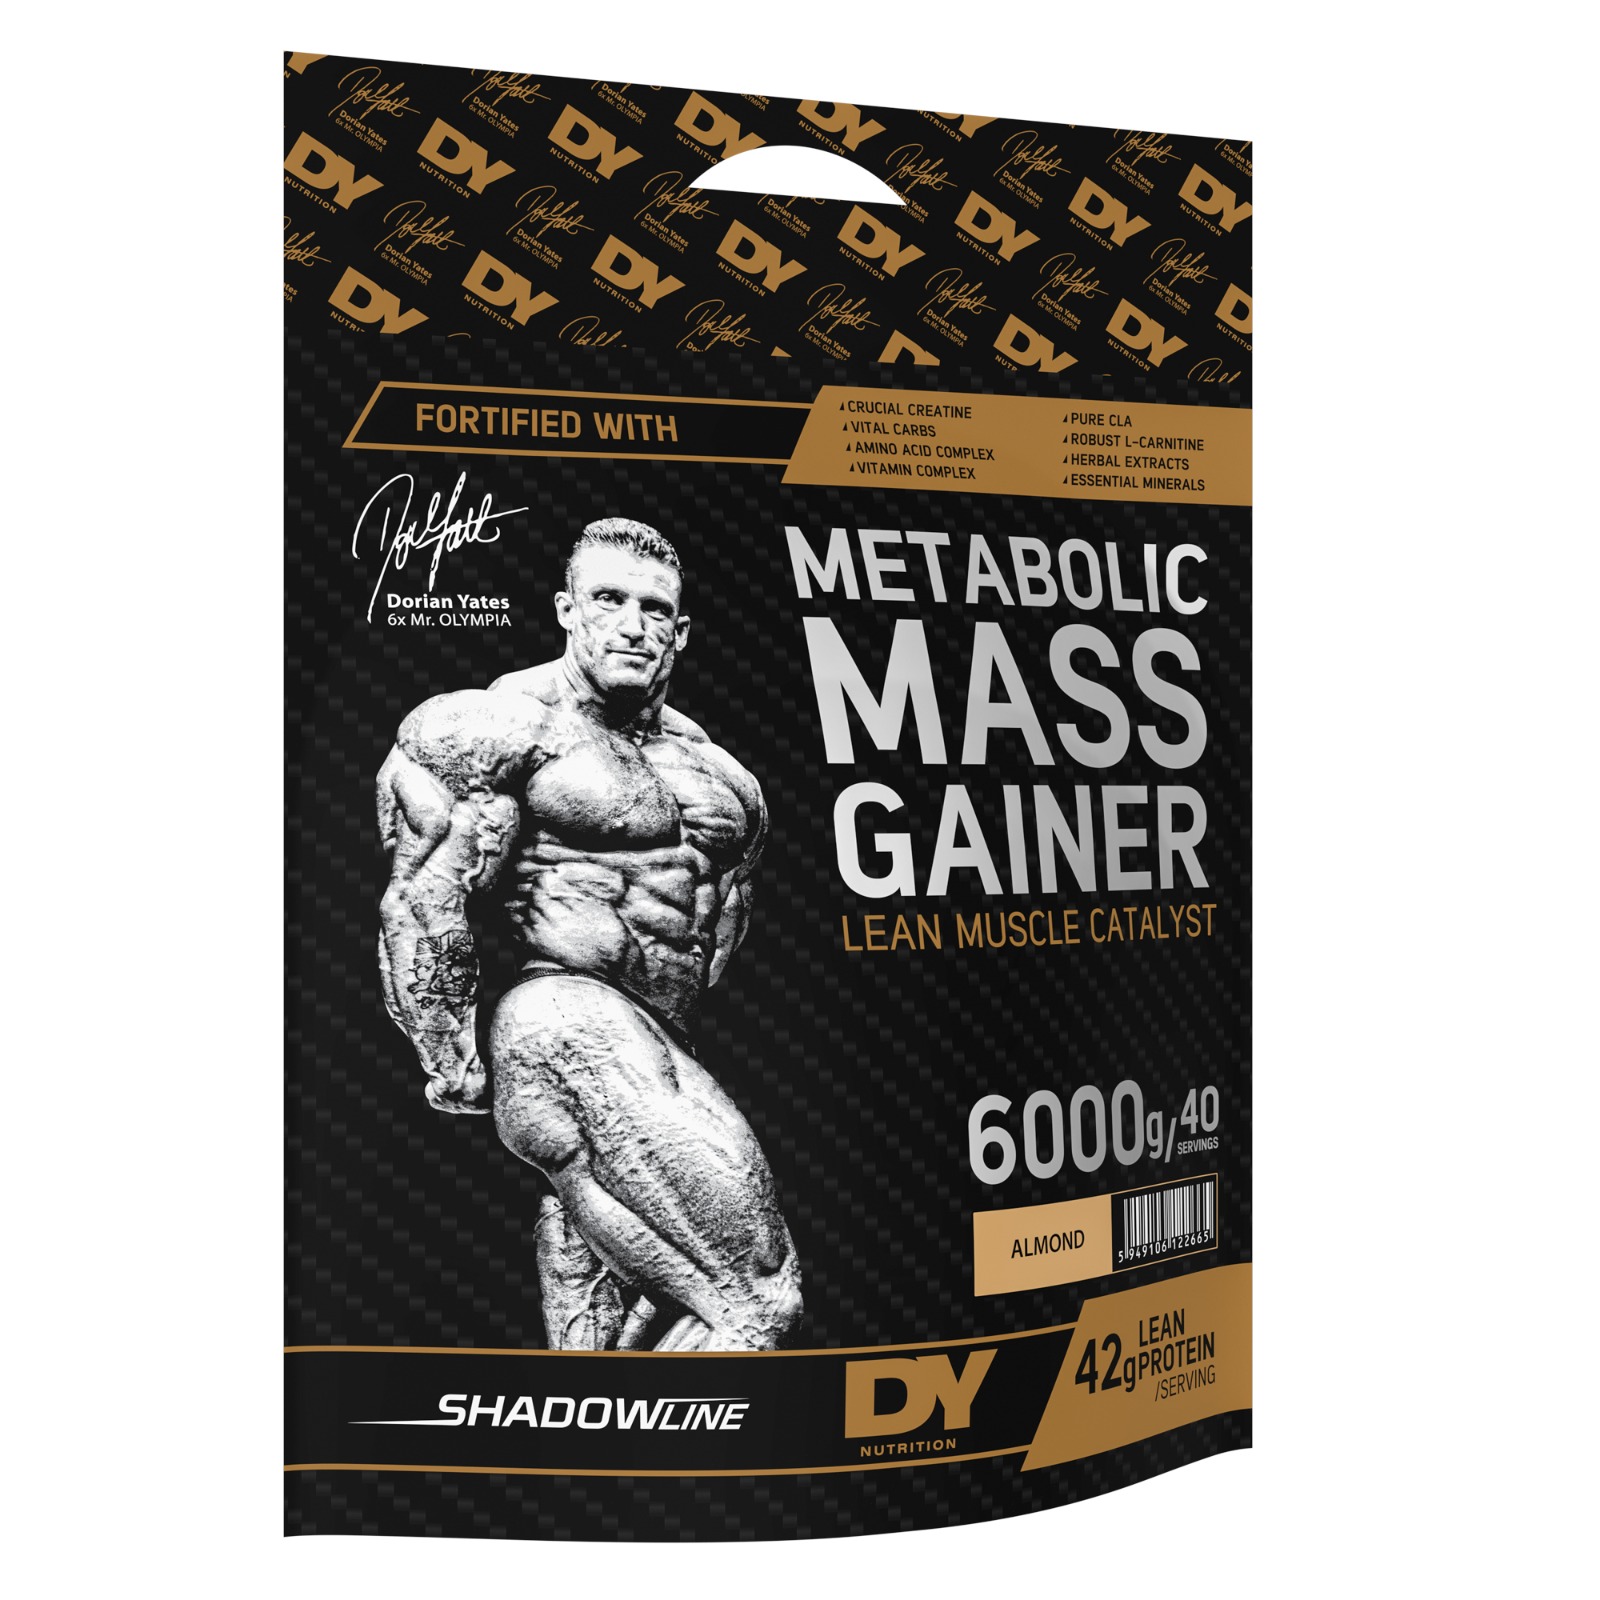 DY Metabolic Mass Gainer Quality supplements in Sri Lanka